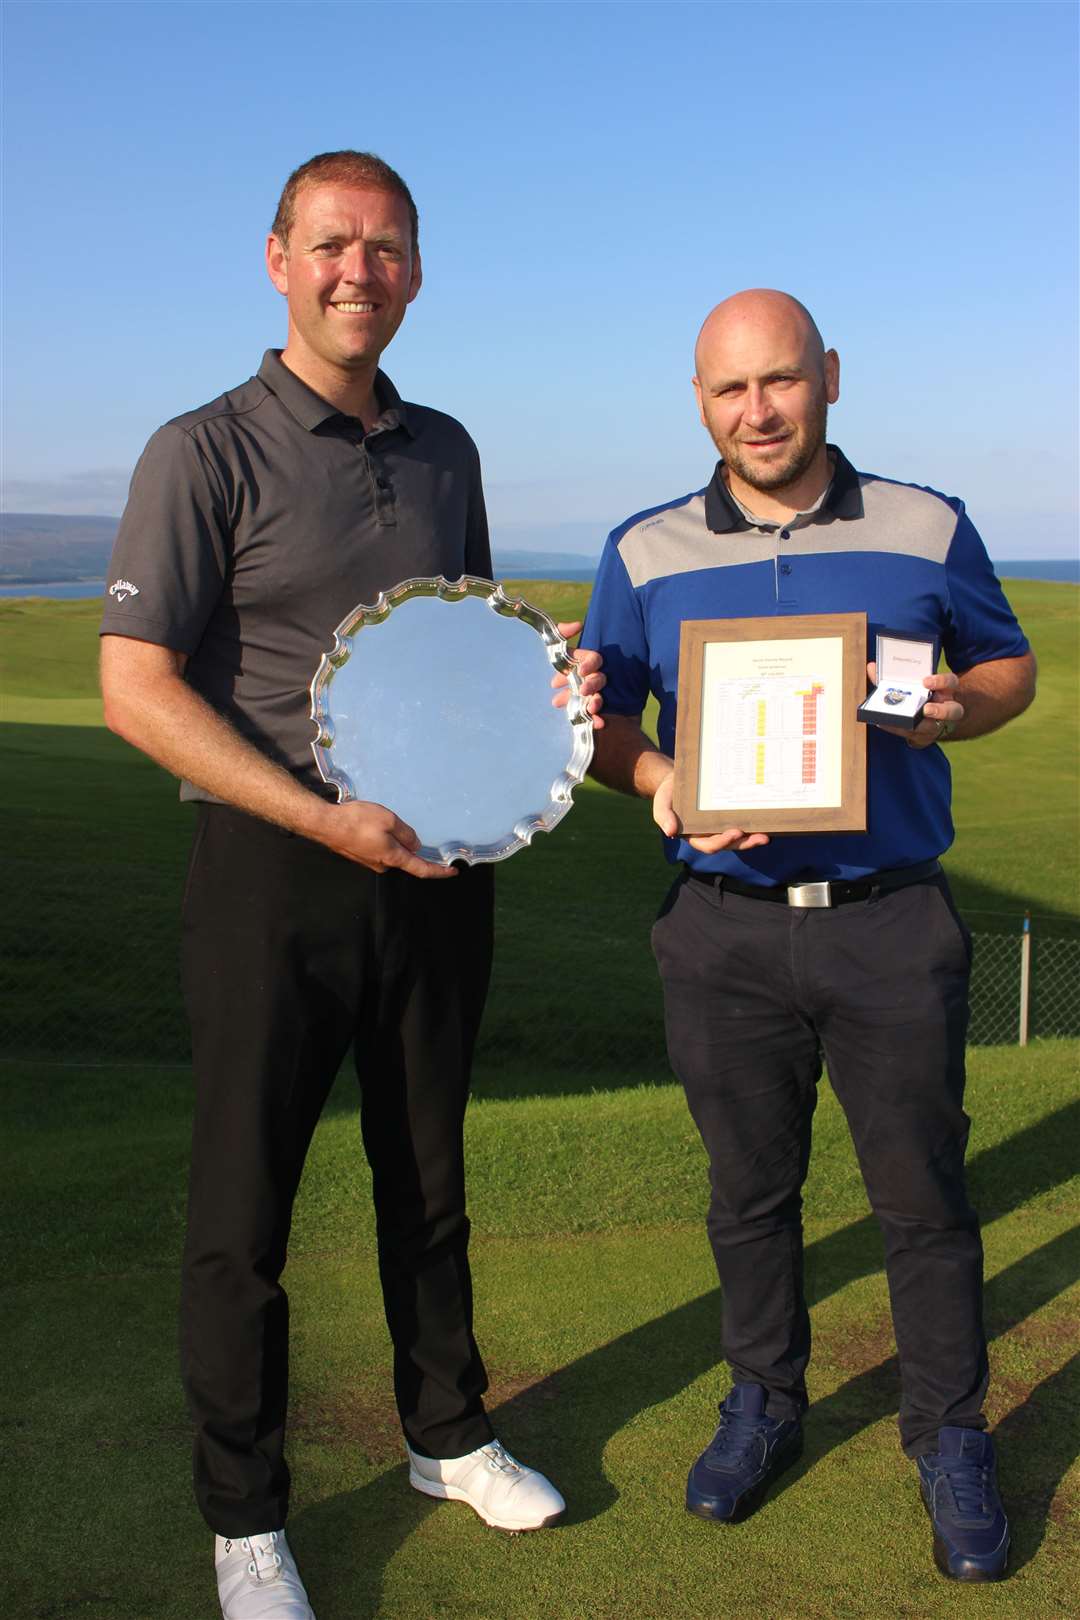 Brora Salver winner David Joel (left) and right David Sanderson with W J Henderson medal and Course record framed card.